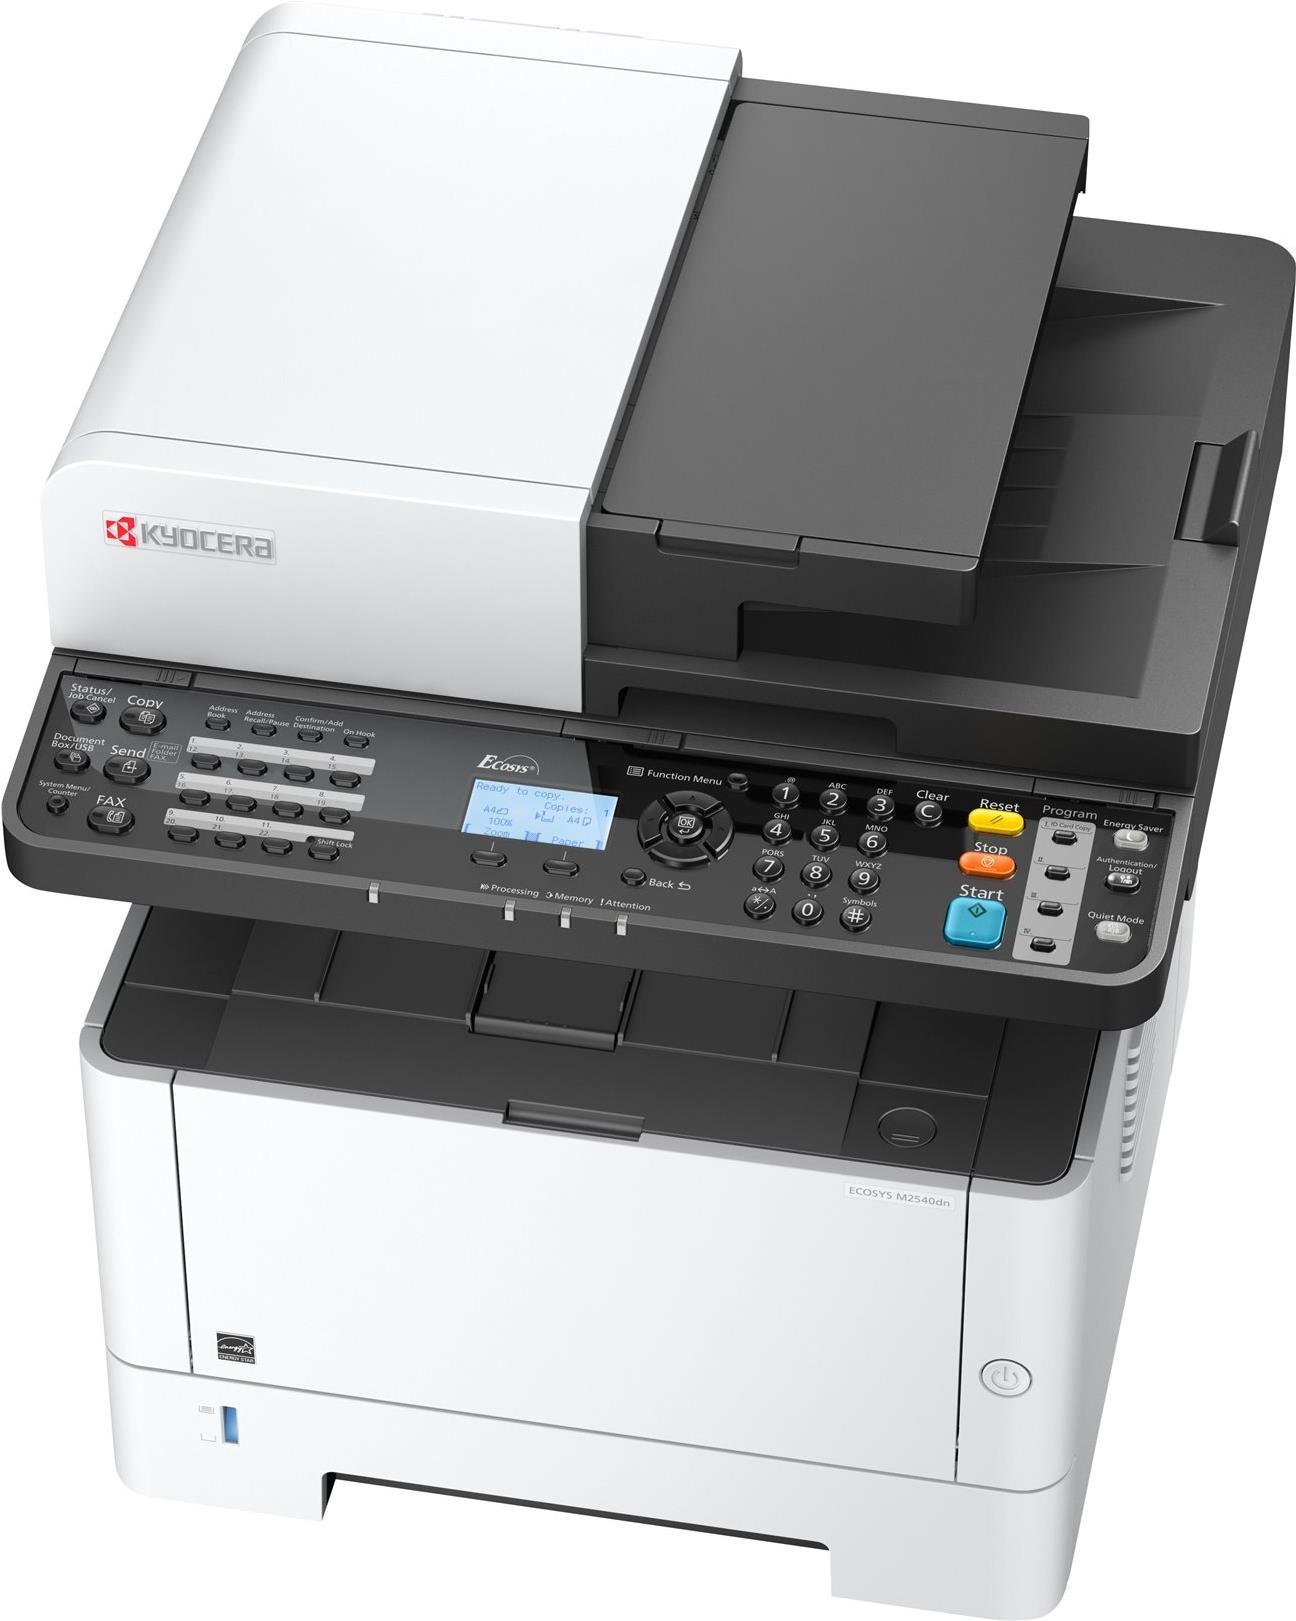 KYOCERA ECOSYS M2540dn/Plus Mono MFP Laser A4 40ppm Print Copy Scan fax Climate Protection System (870B61102SH3NL3)